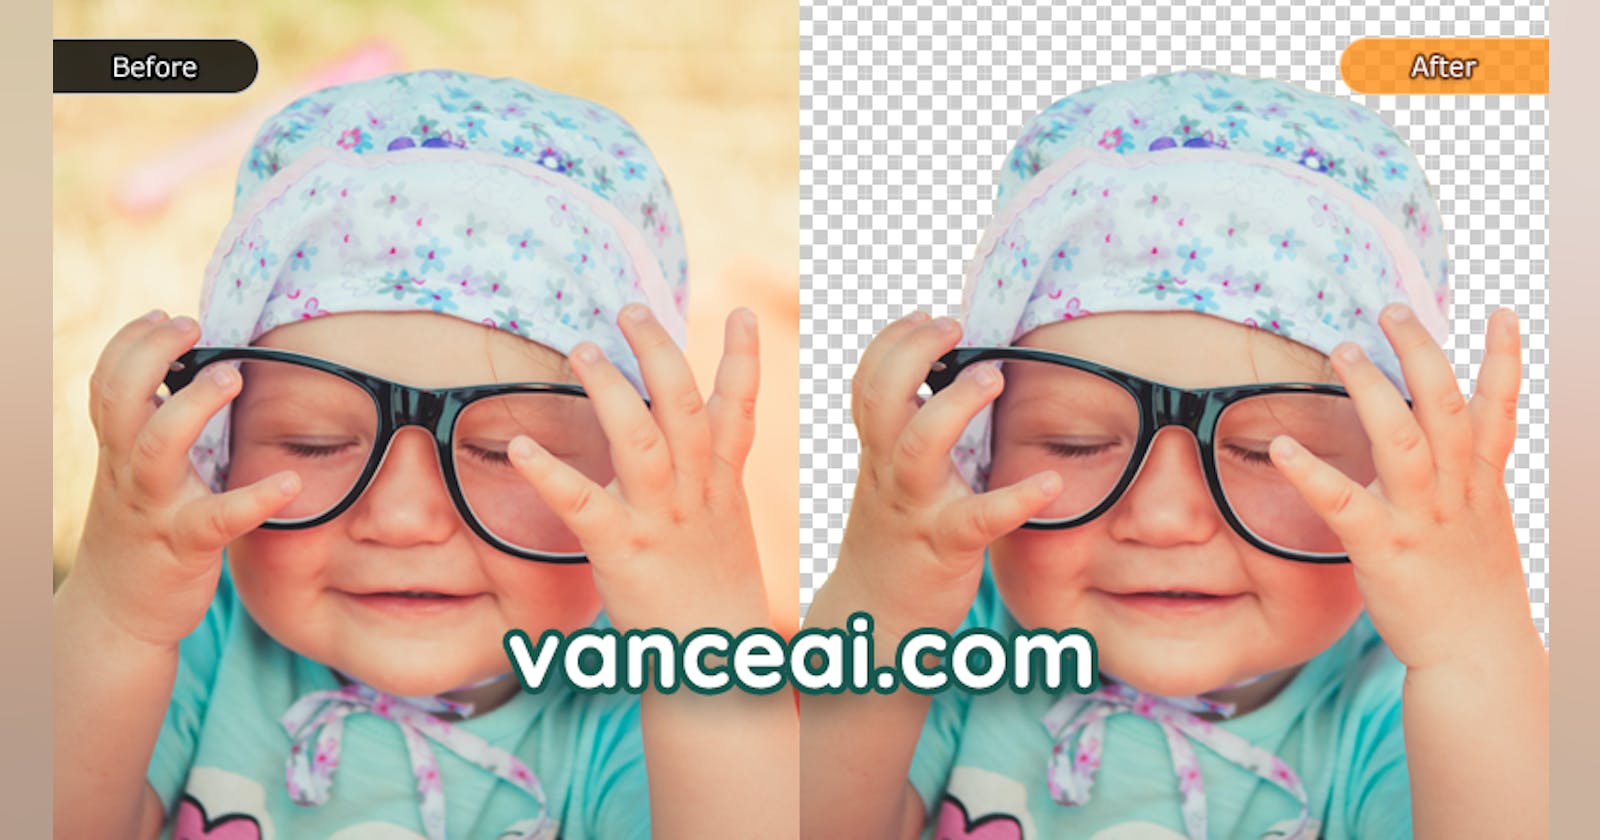 Simplify Photos Editing Workflow with Artificial Intelligence, VanceAI Launches API Service